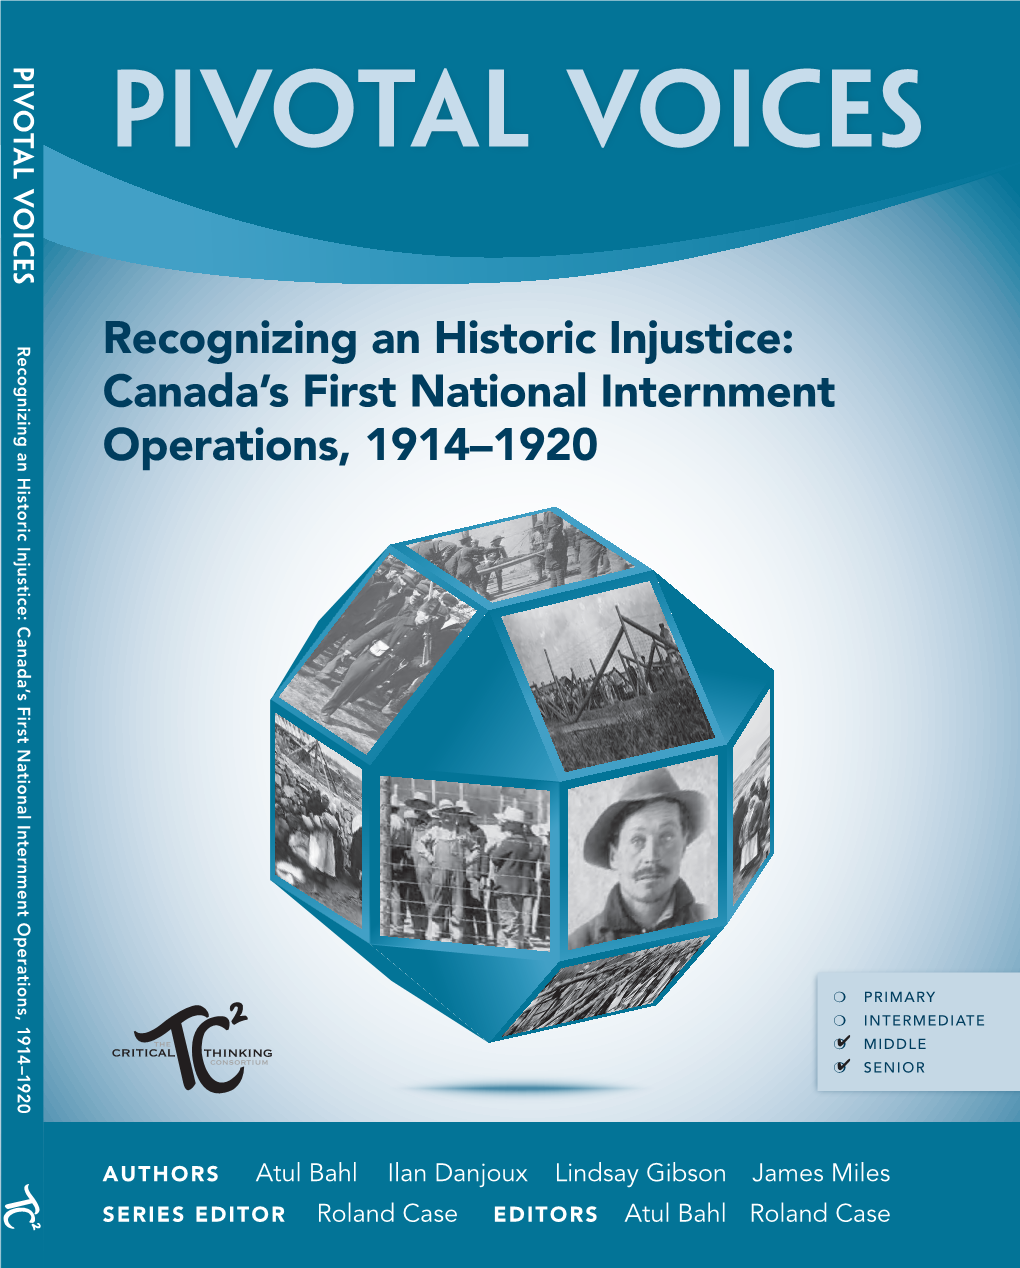 Pivotal Voices Pivotal Pivotal Voices Is a Project of the Critical Thinking Consortium